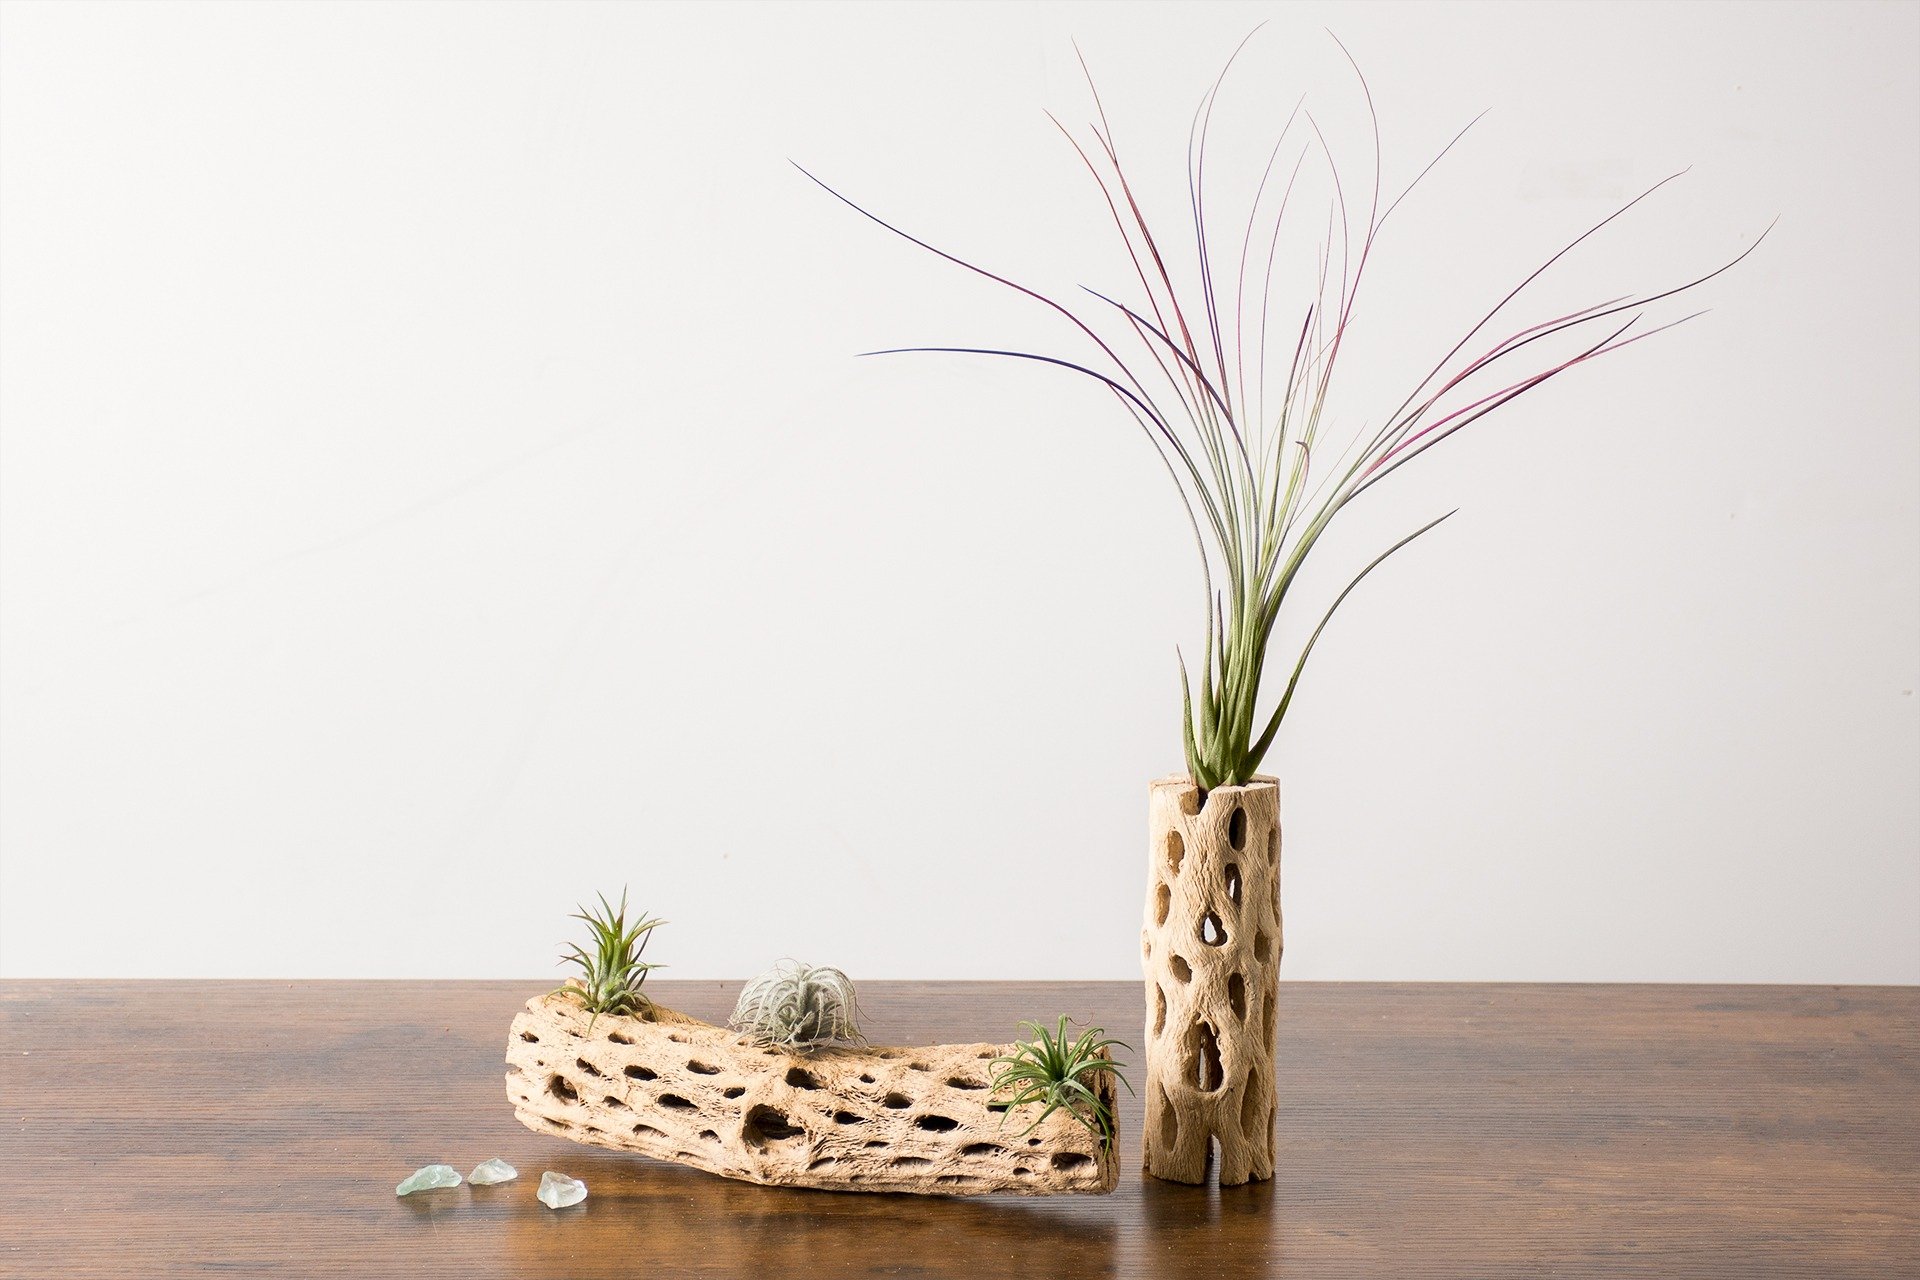 Live Air Plant Tillandsias Beach Royale in an Approximately 4”x 5”x 5” Glass Bowl